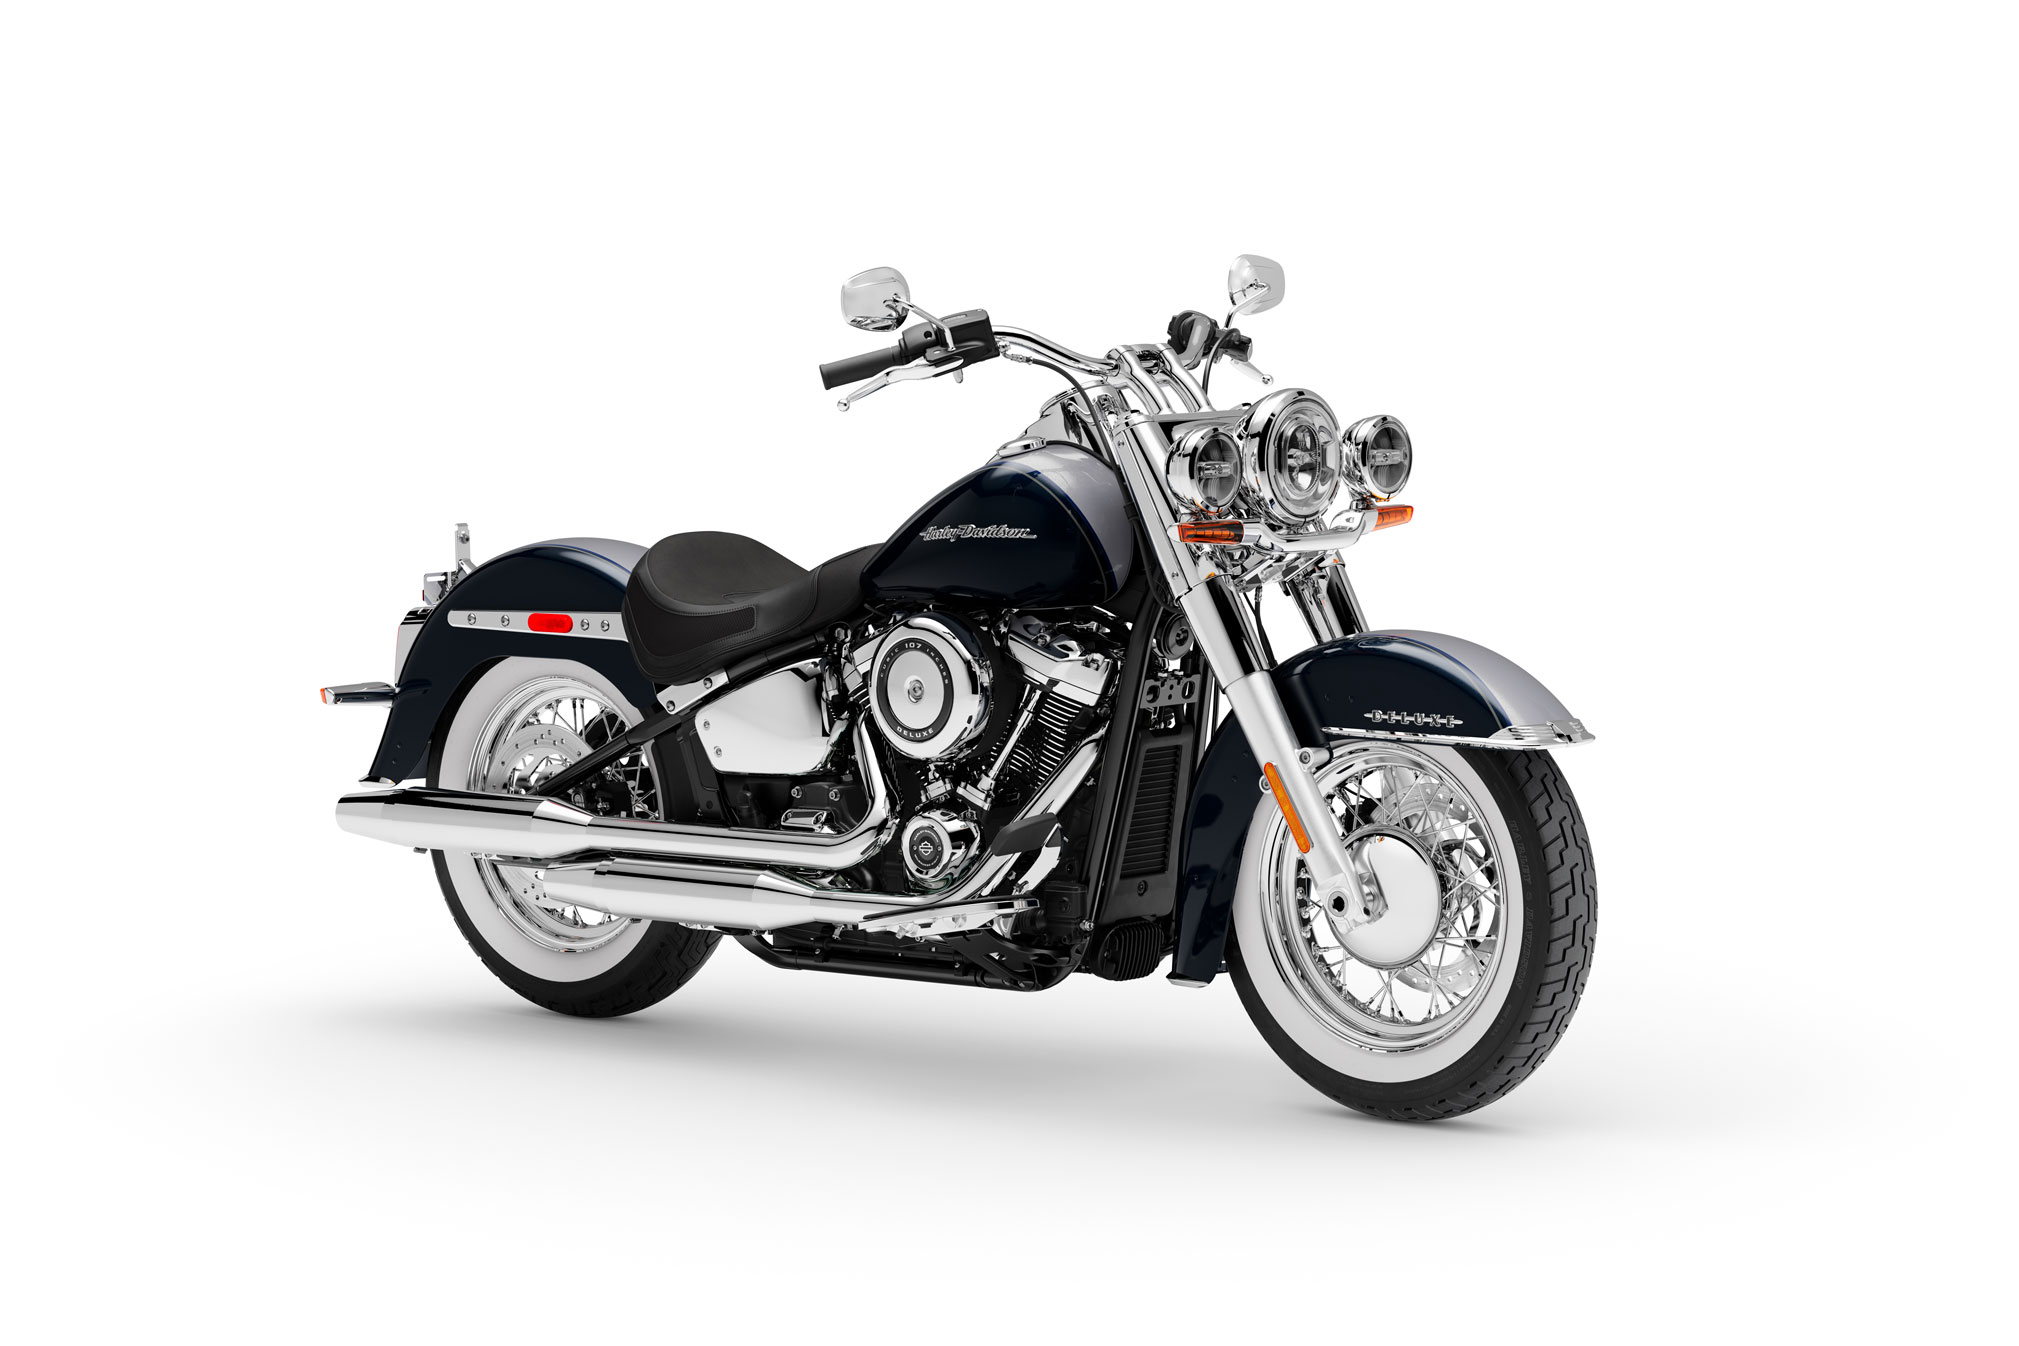 2019 Harley Davidson Deluxe Guide Total Motorcycle